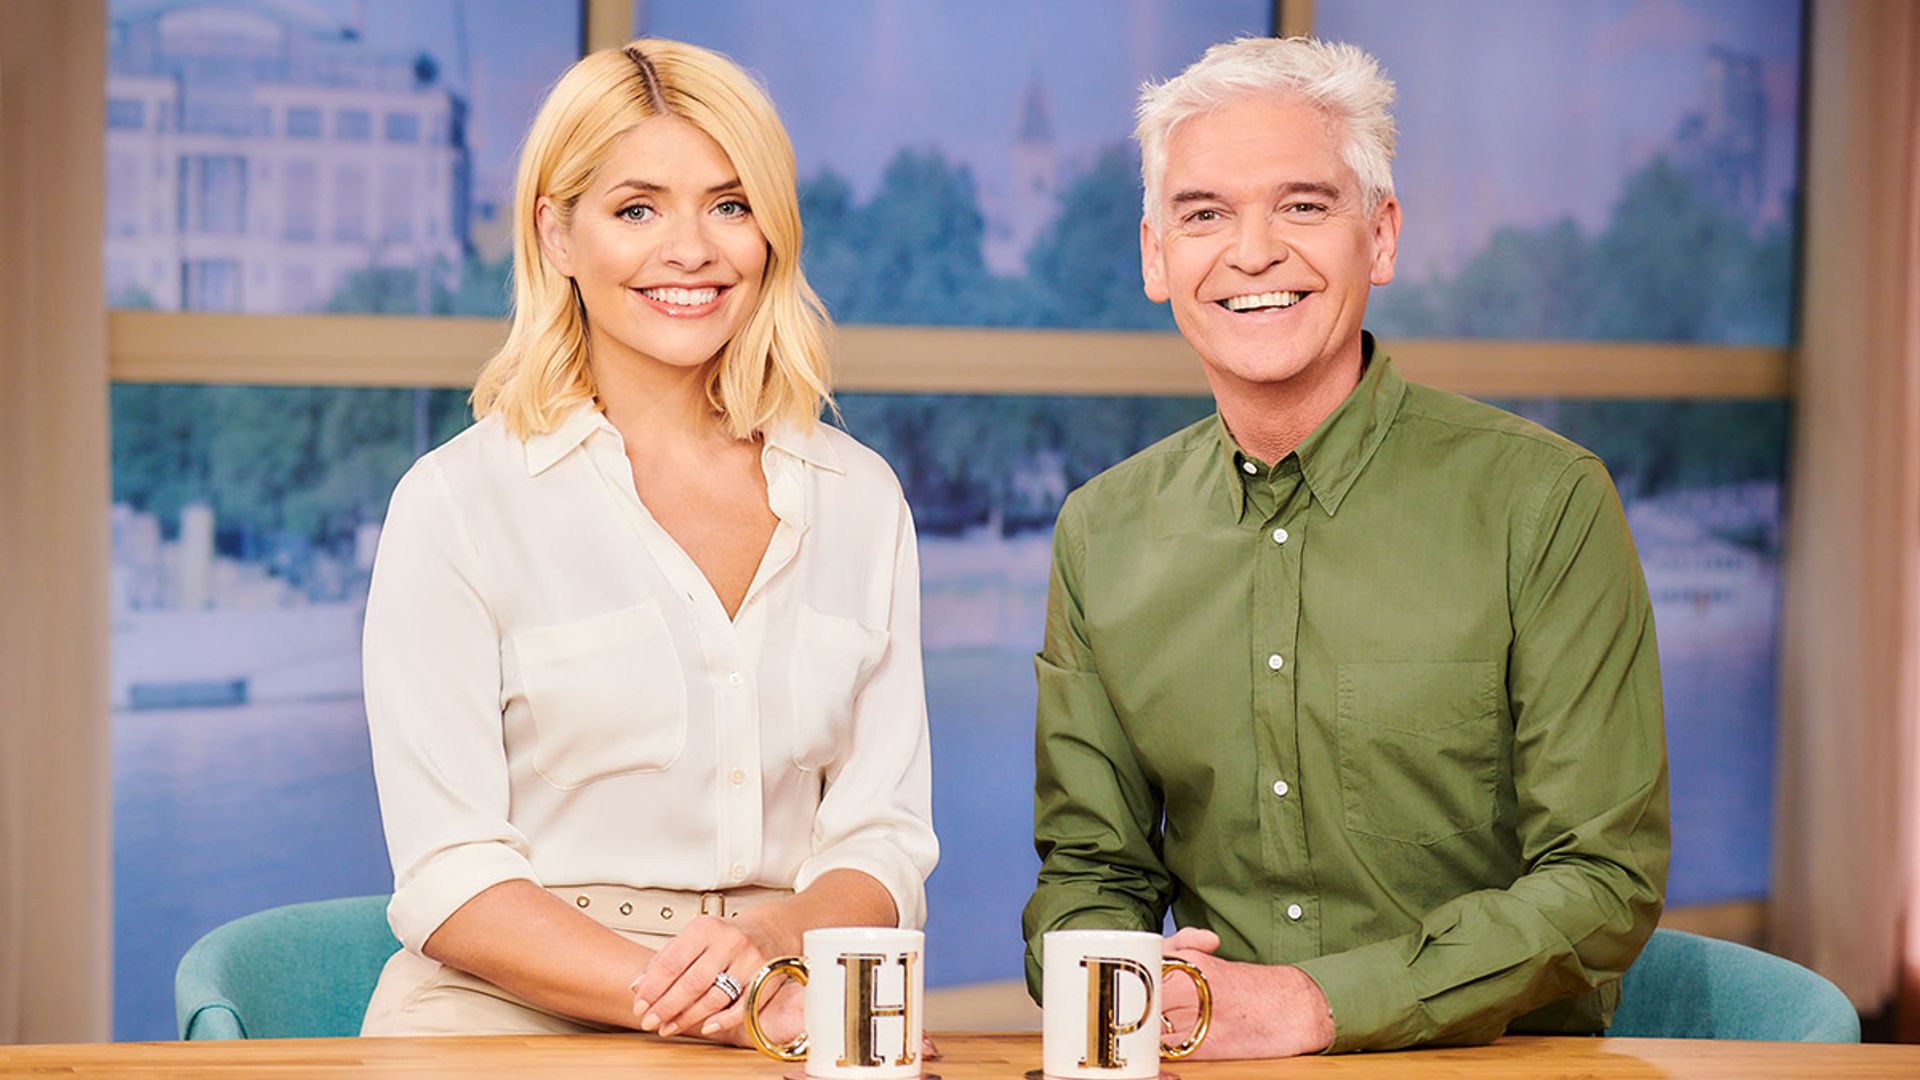 This Morning stars Holly Willoughby and Phillip Schofield’s staggering net worth revealed